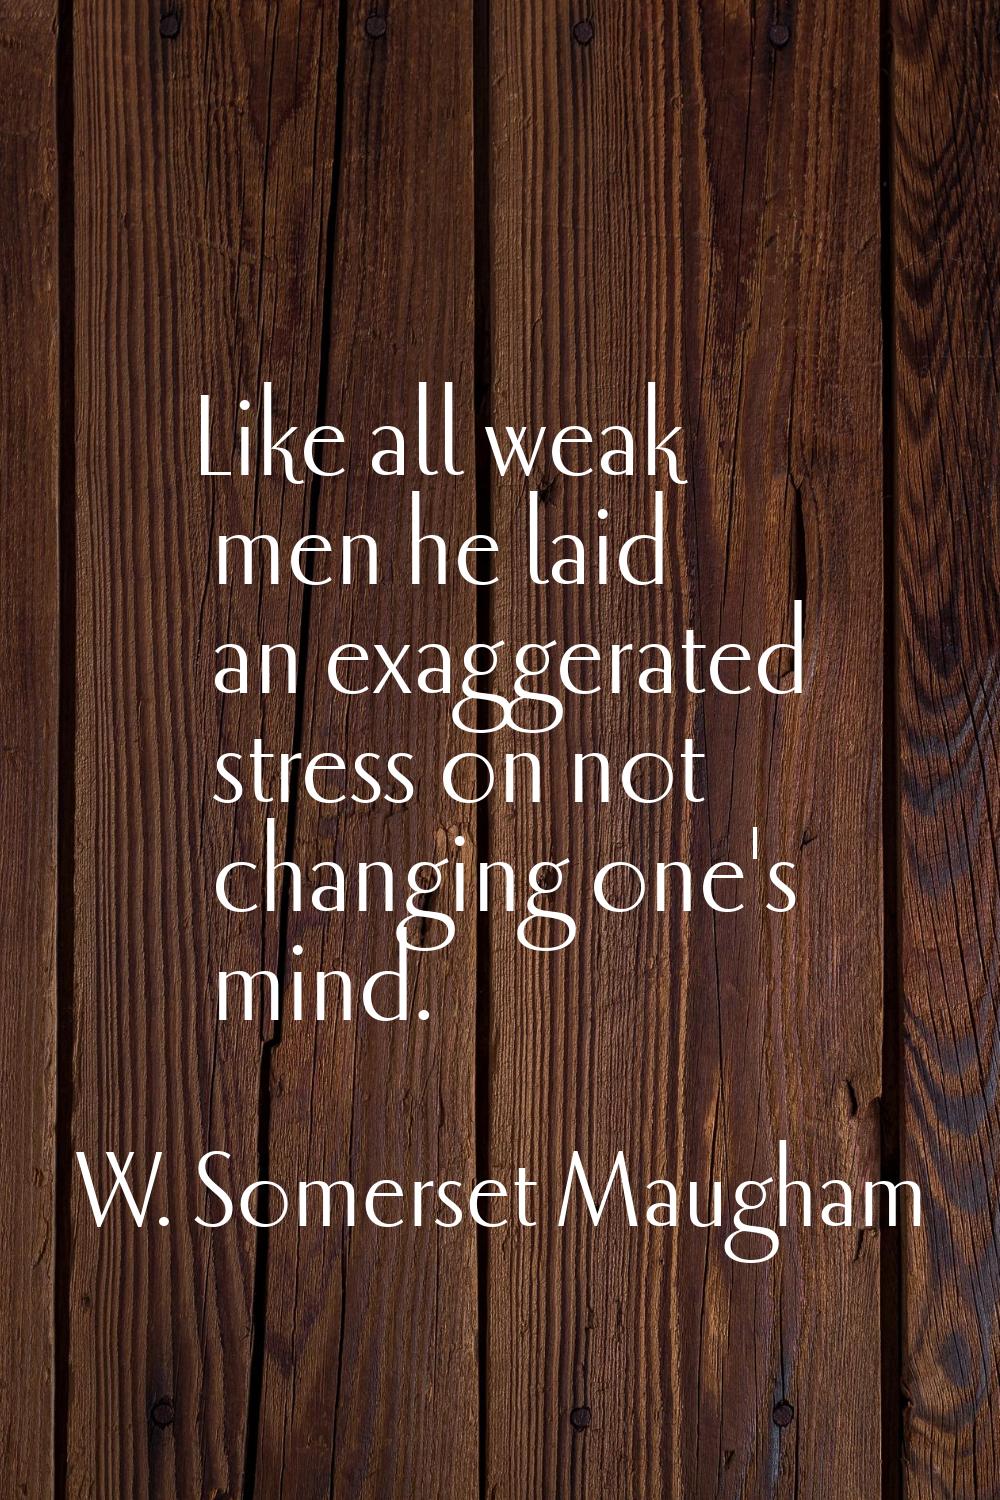 Like all weak men he laid an exaggerated stress on not changing one's mind.